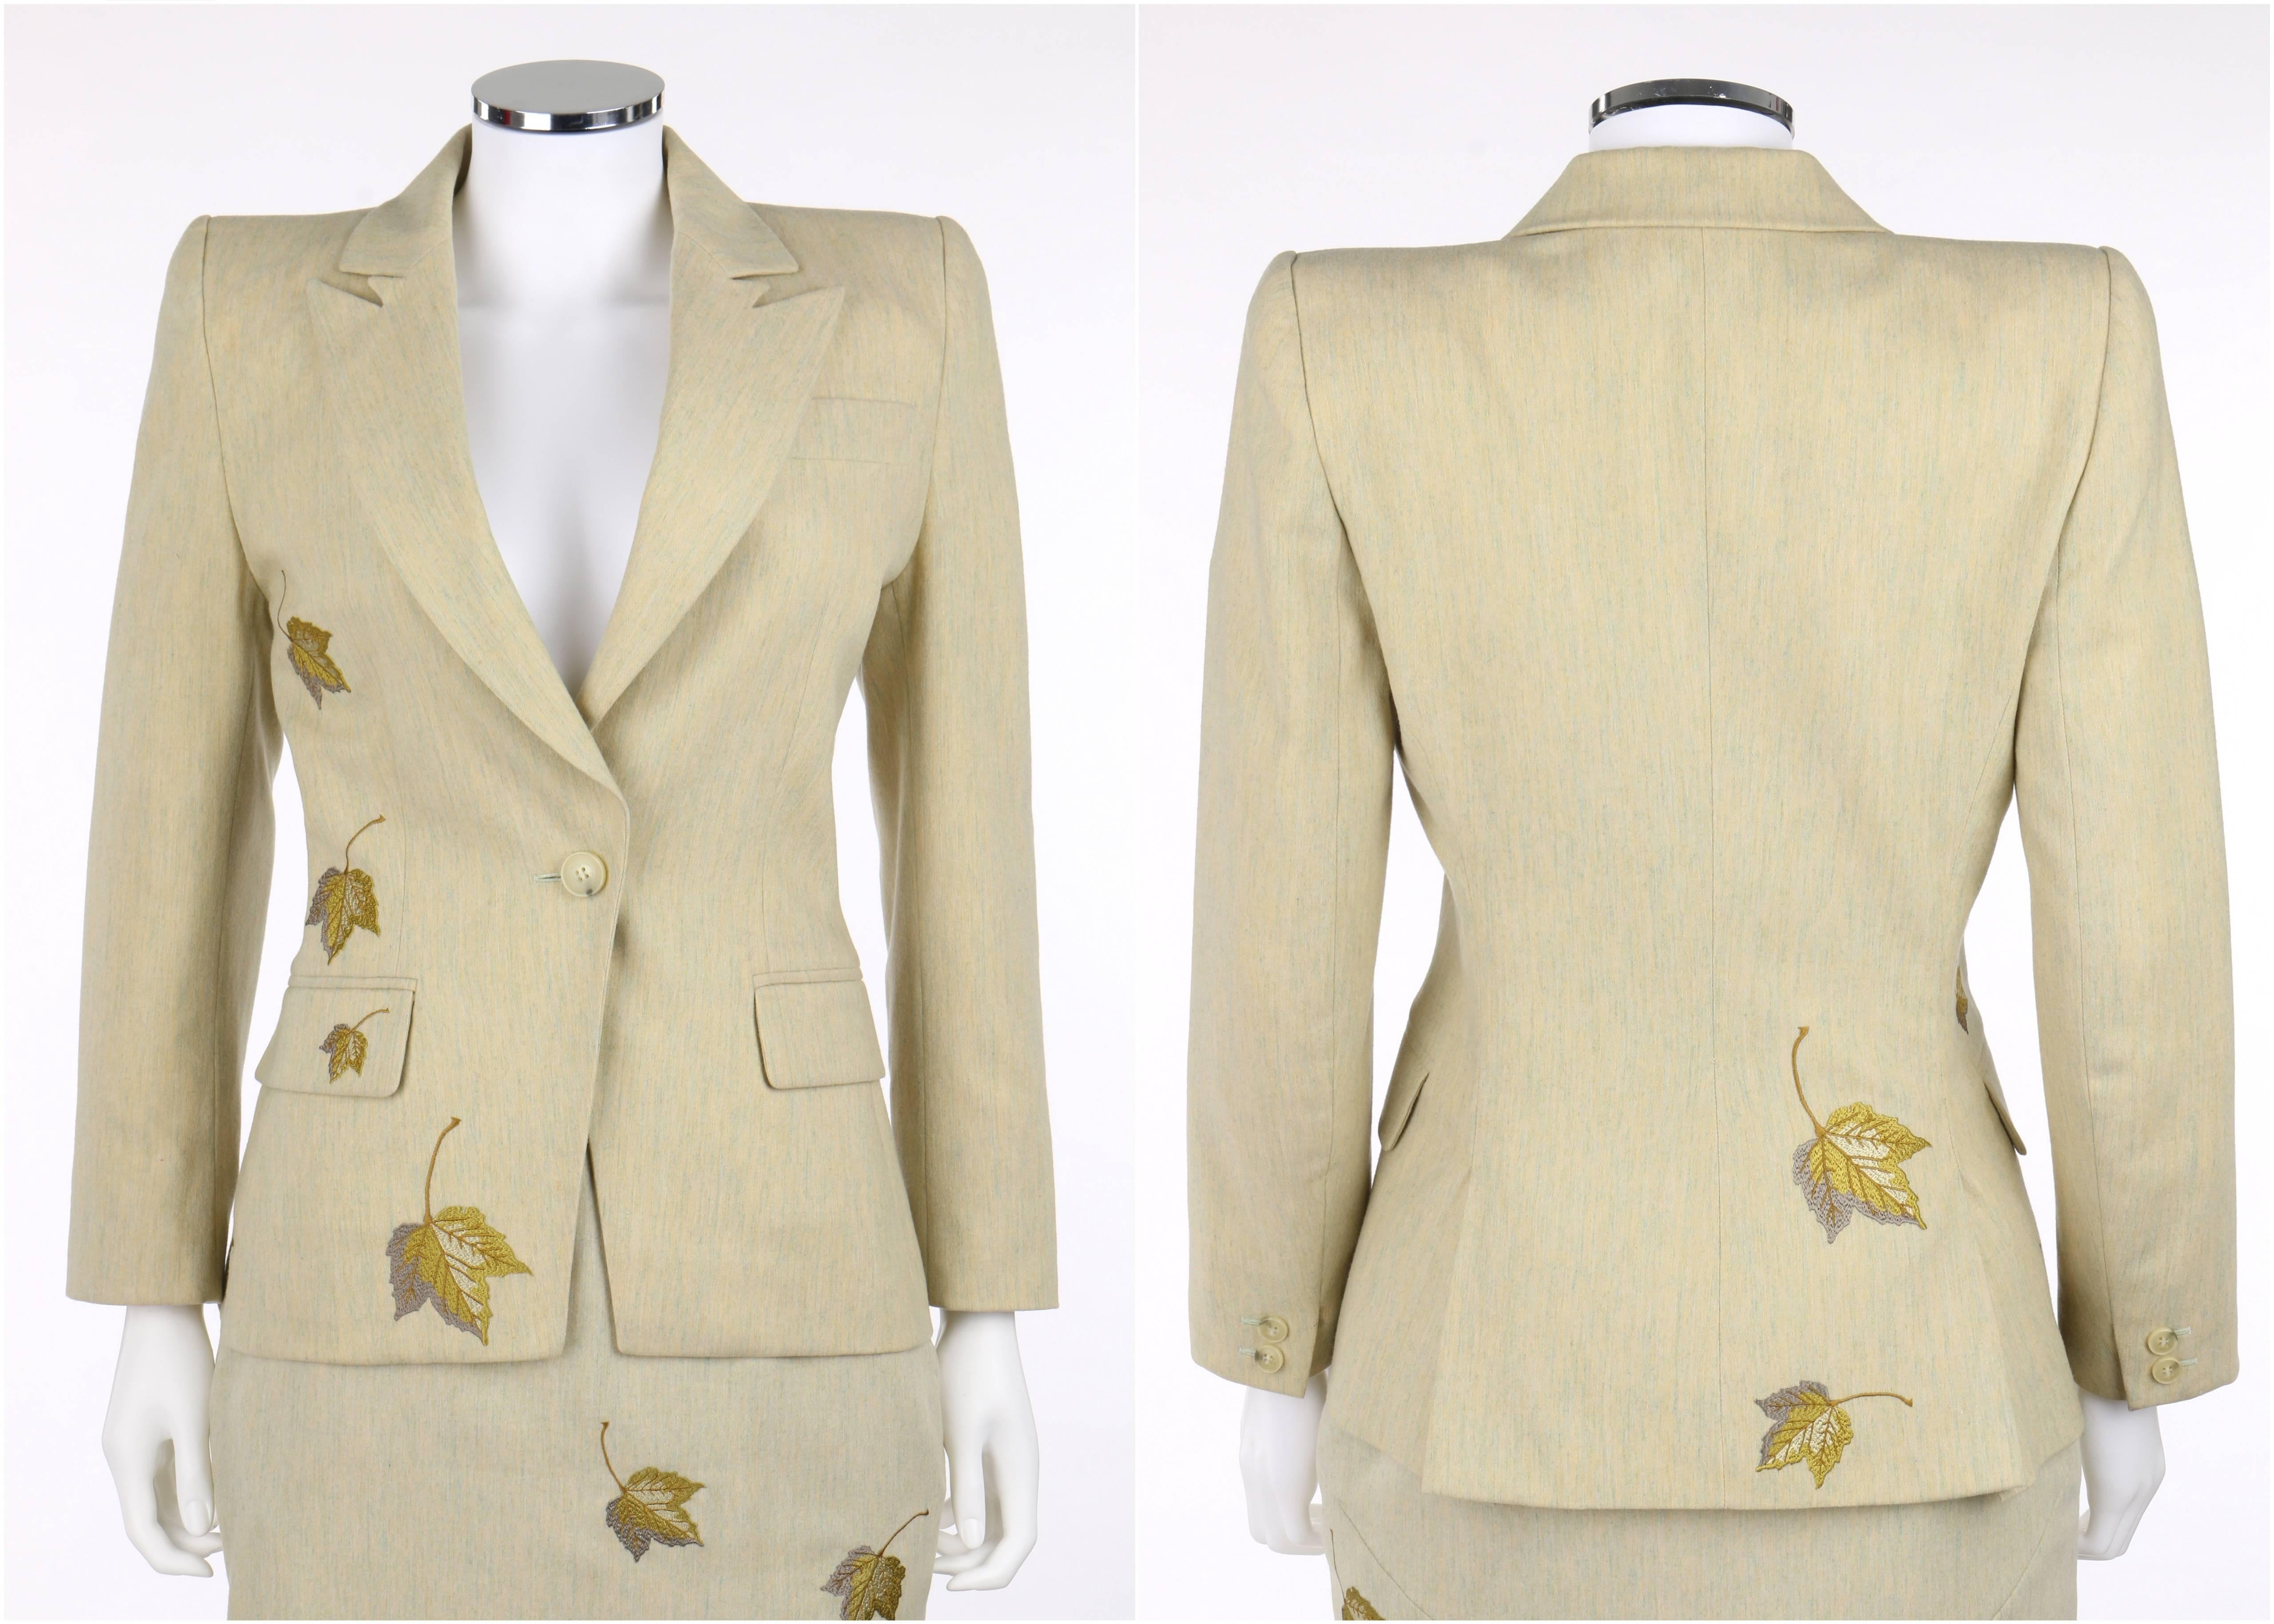 Givenchy Couture A/W 1998 3 piece jacket, skirt, and pants suit set designed by Alexander McQueen. Pale yellow with hints of light blue wool cashmere blend. Three notch lapel collar jacket. Long sleeves with two mock button closures at cuffs.